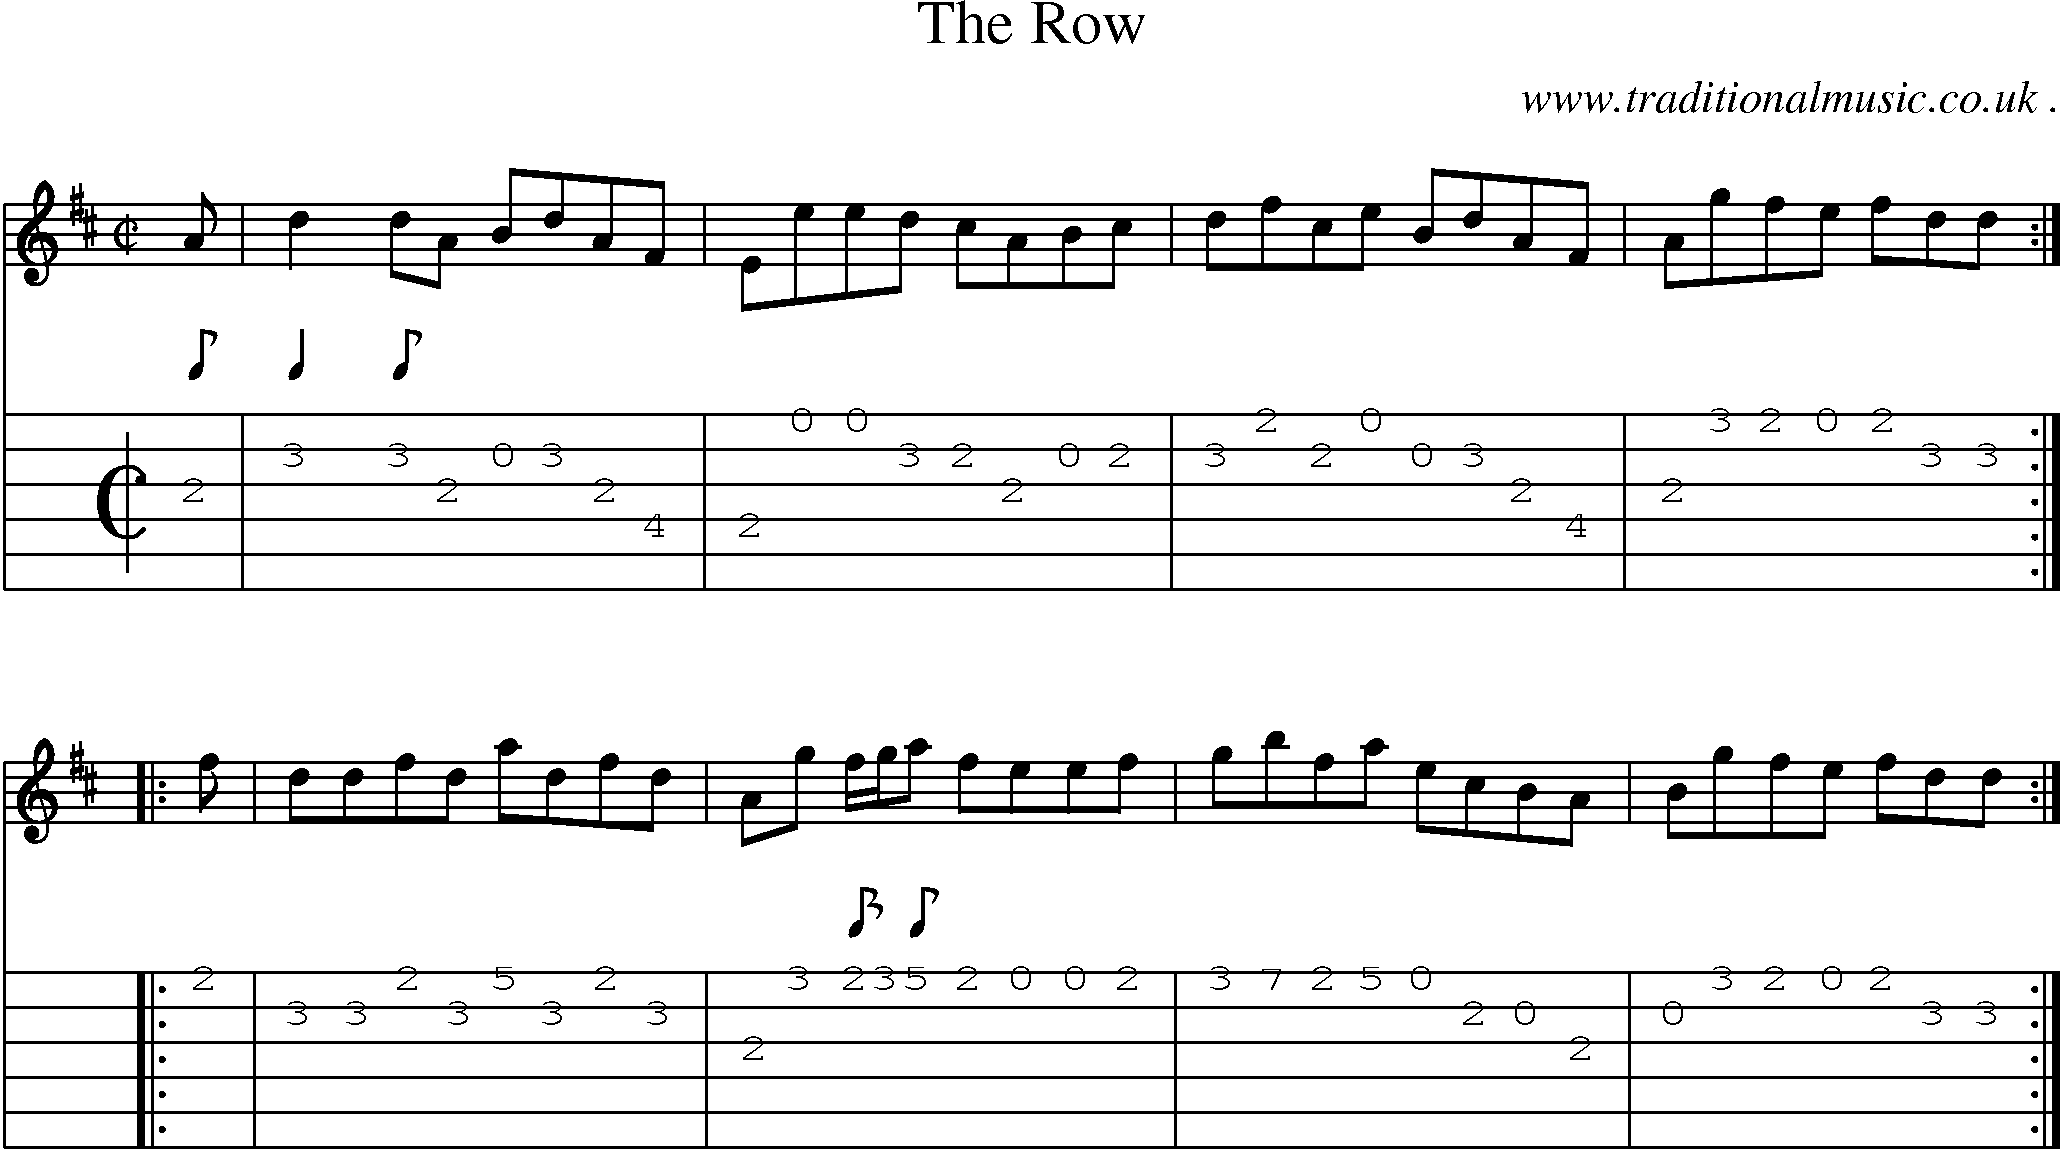 Sheet-music  score, Chords and Guitar Tabs for The Row